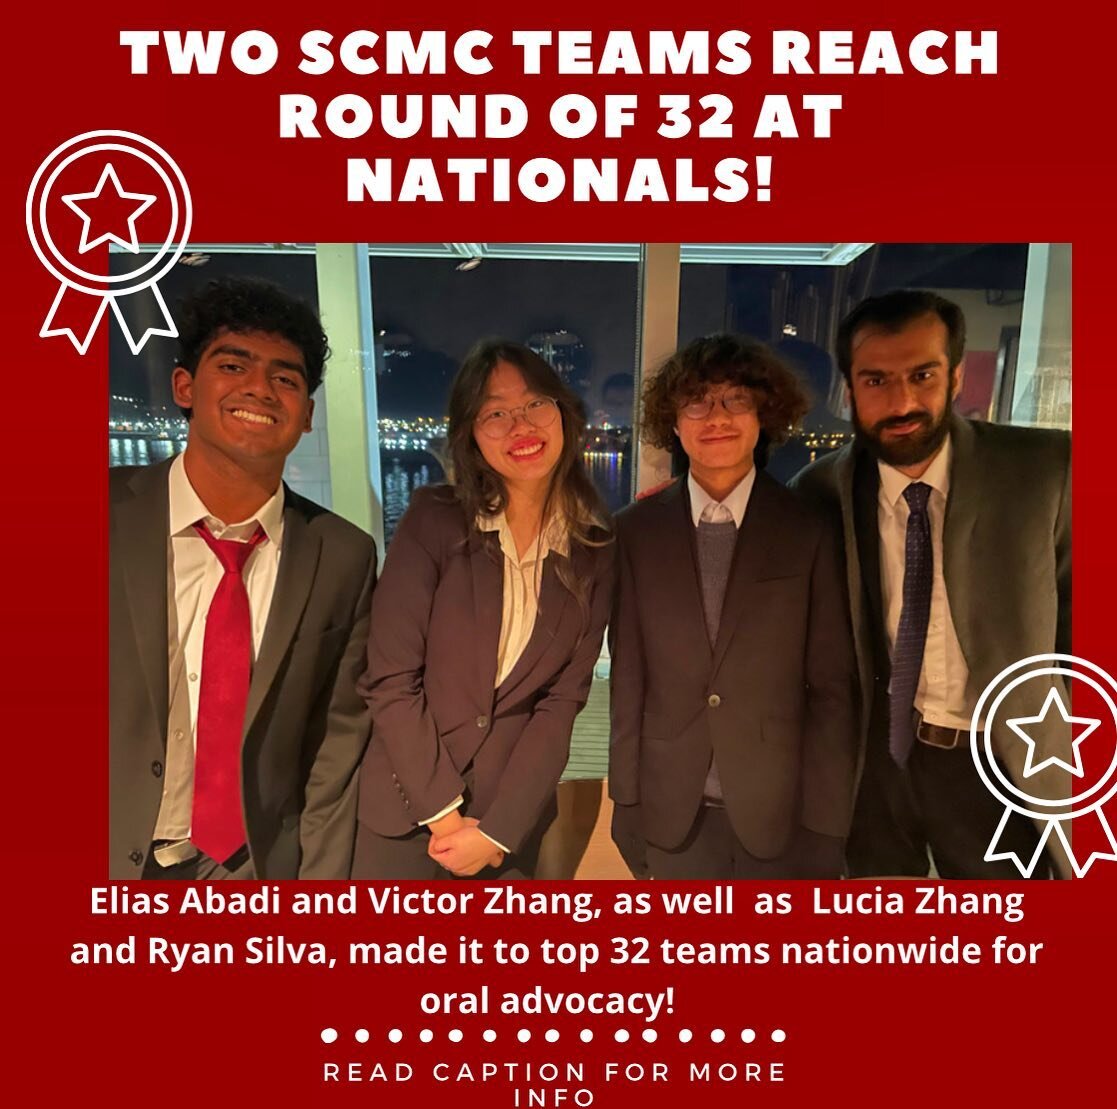 🏆🎖️NATIONAL RESULTS🎖️🏆
We are so proud to announce that two of our teams advanced to the round of 32 on the second day of national oral advocacy competition! Those teams are President Elias Abadi+Senior Assistant to the President/Brief Writing Co